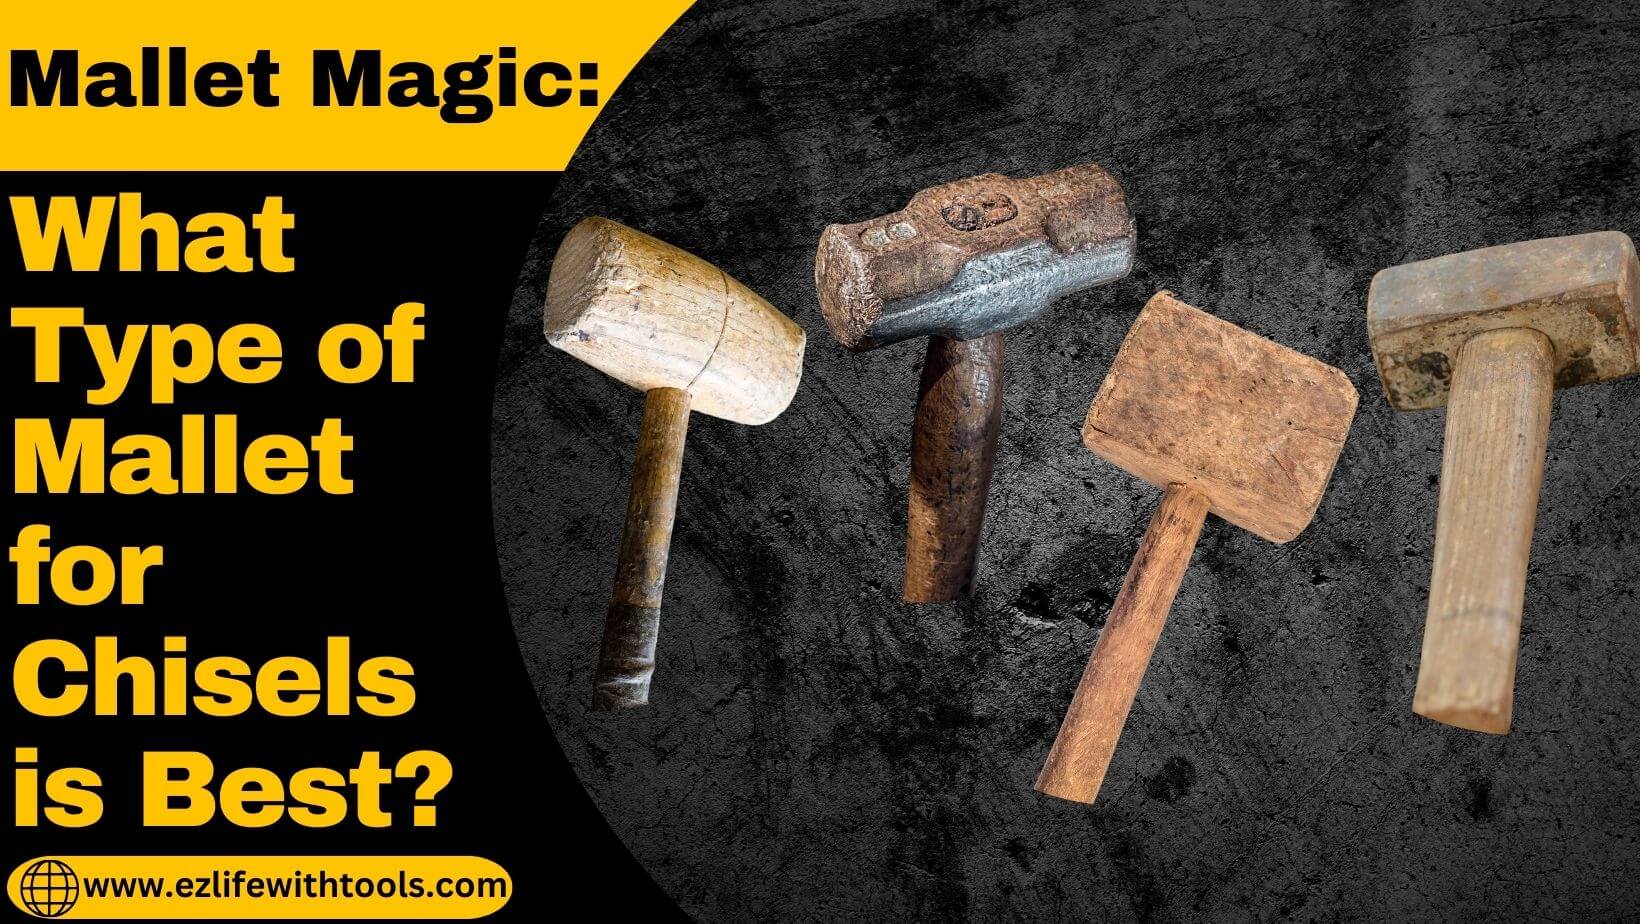 What Type of Mallet for Chisels